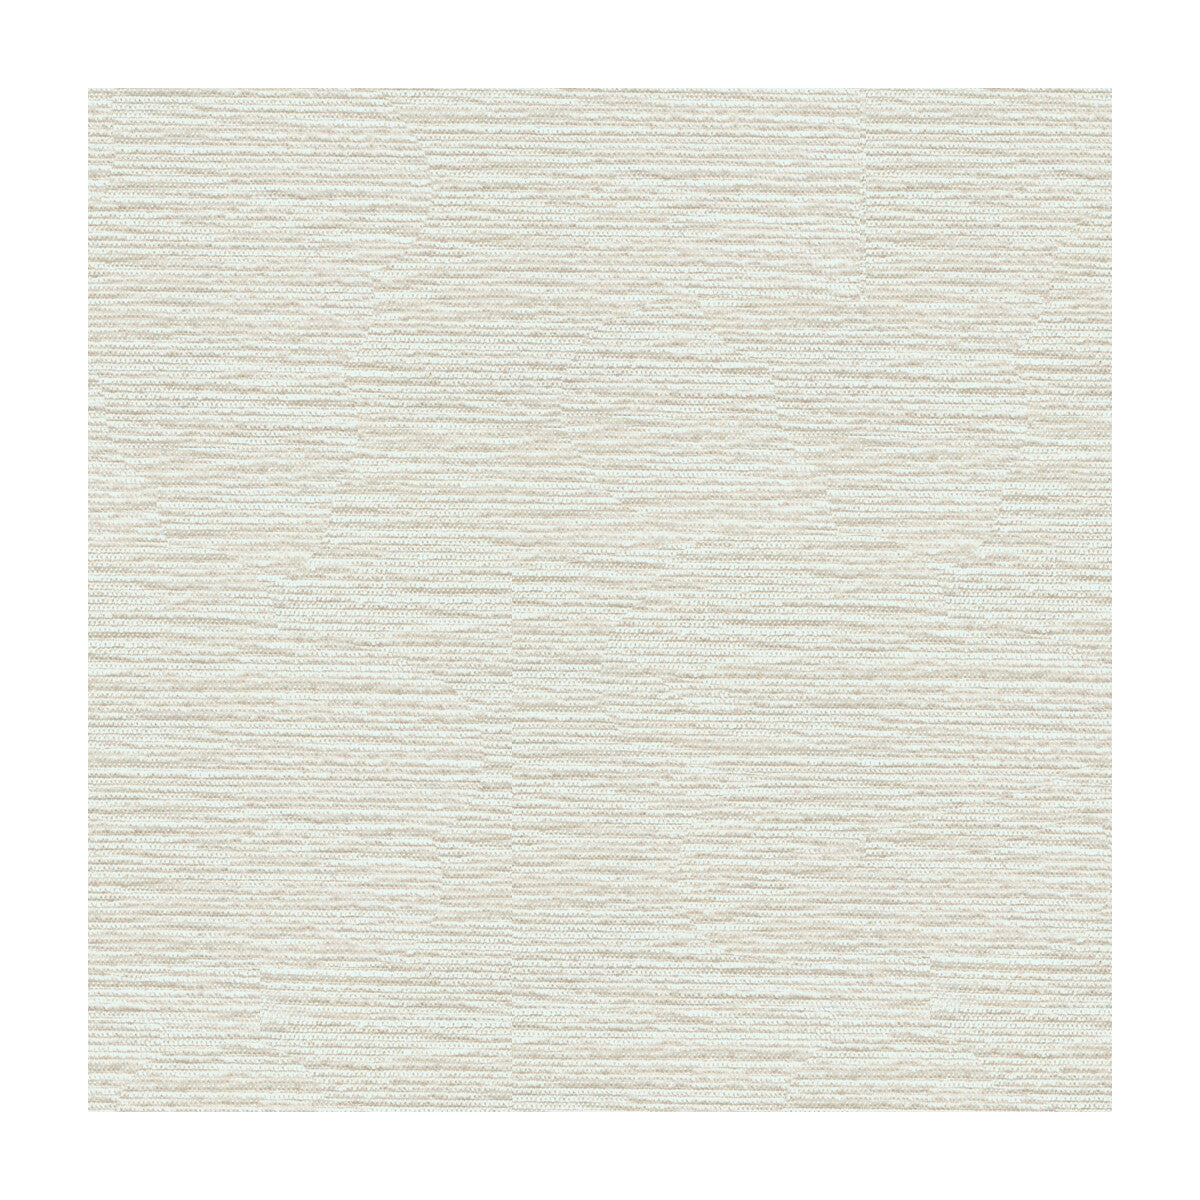 Portside fabric in ivory color - pattern 34866.101.0 - by Kravet Design in the Oceania Indoor Outdoor collection